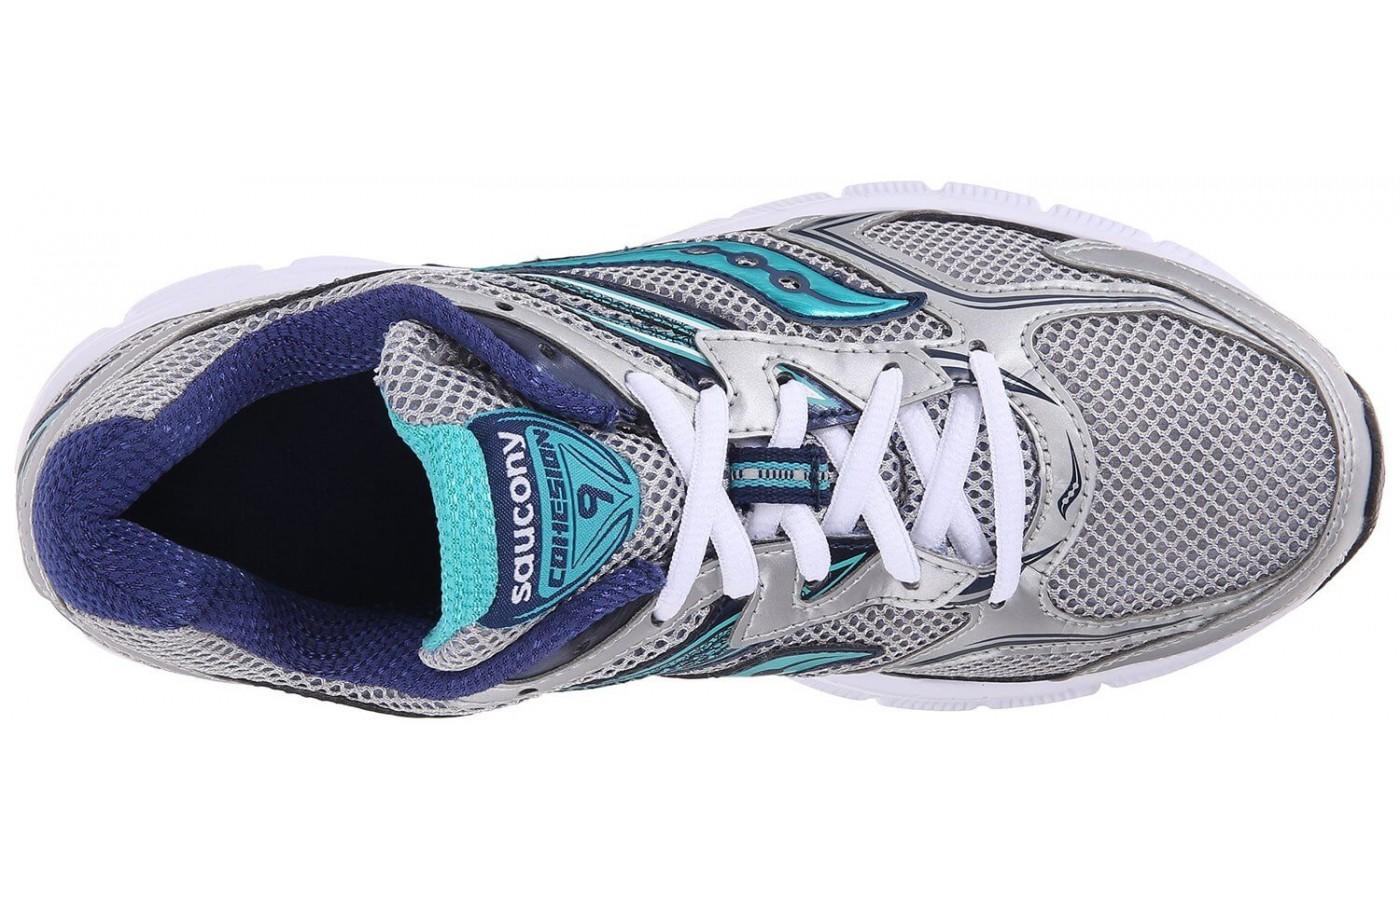 The Saucony Cohesion 9 has an extra-stable heel cup in the sole.